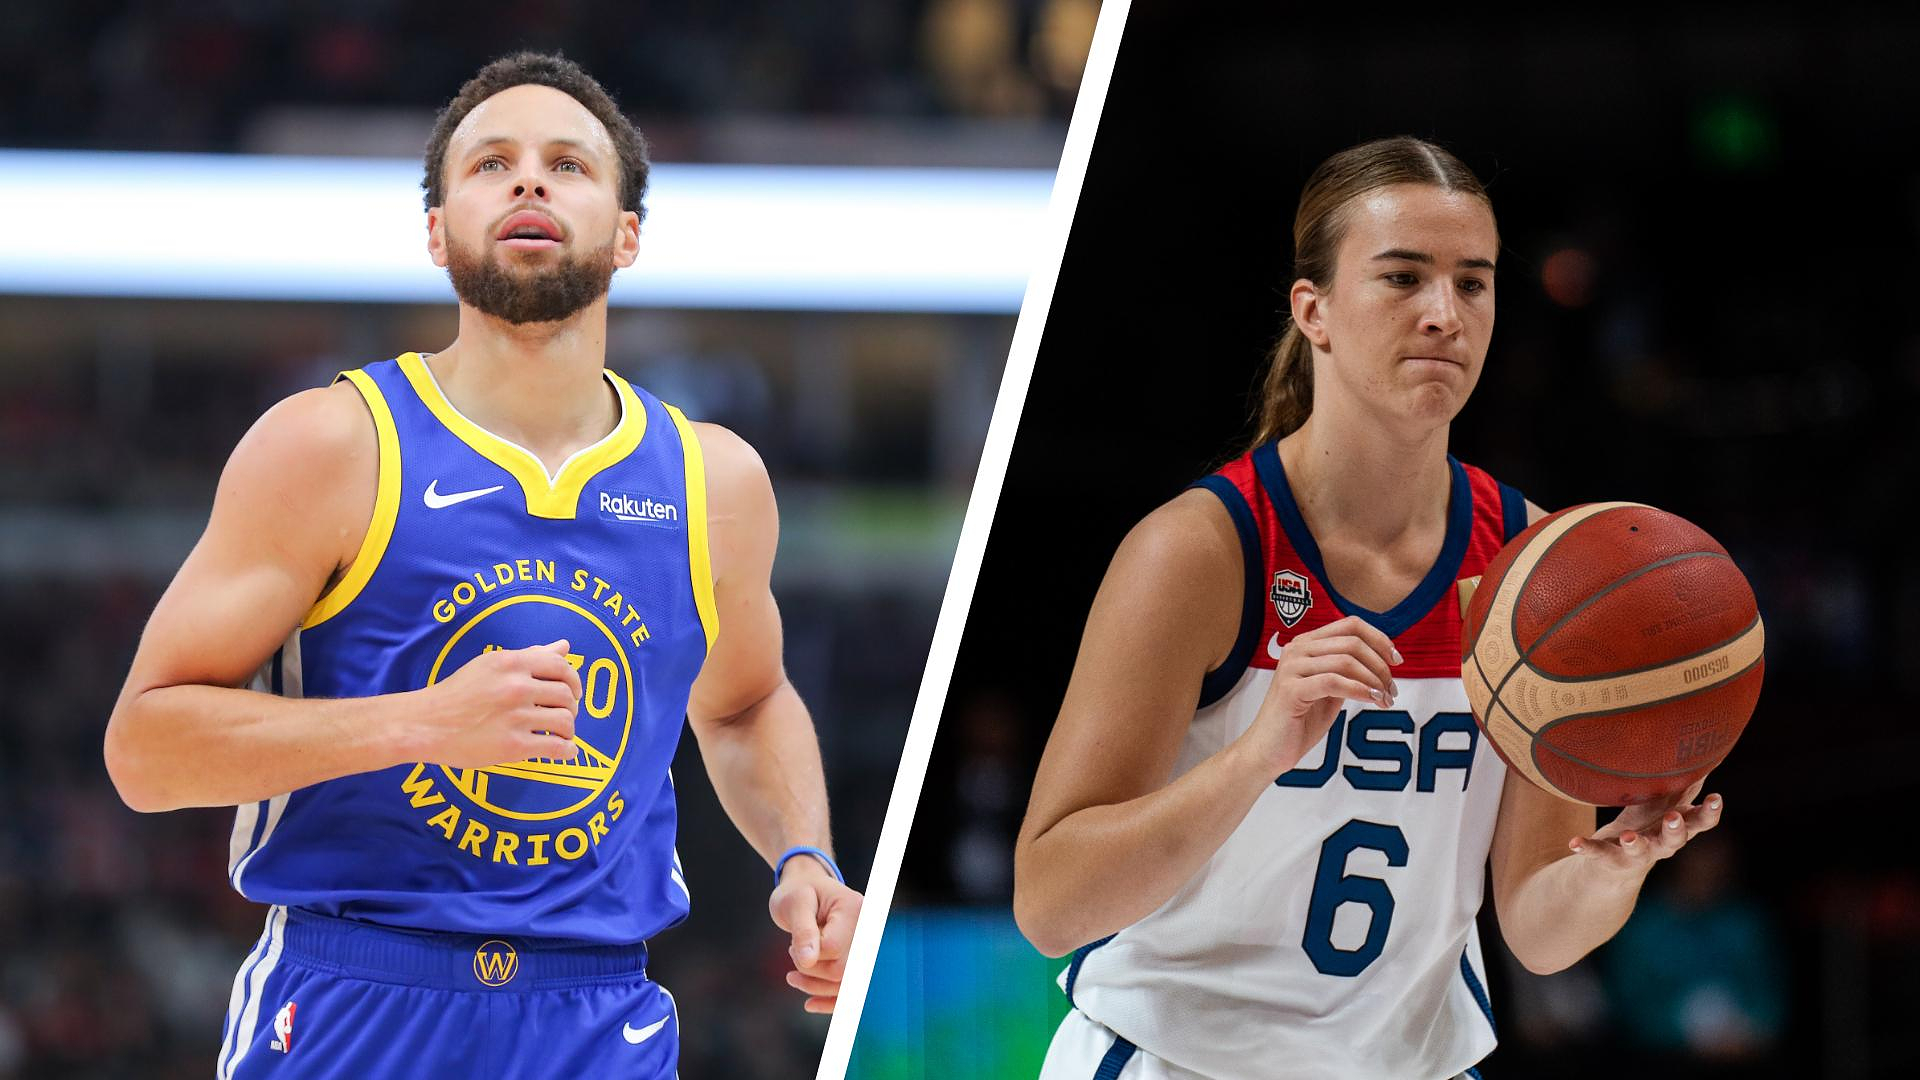 NBA: Stephen Curry will face Sabrina Ionescu in a shooting contest at the All Star Game